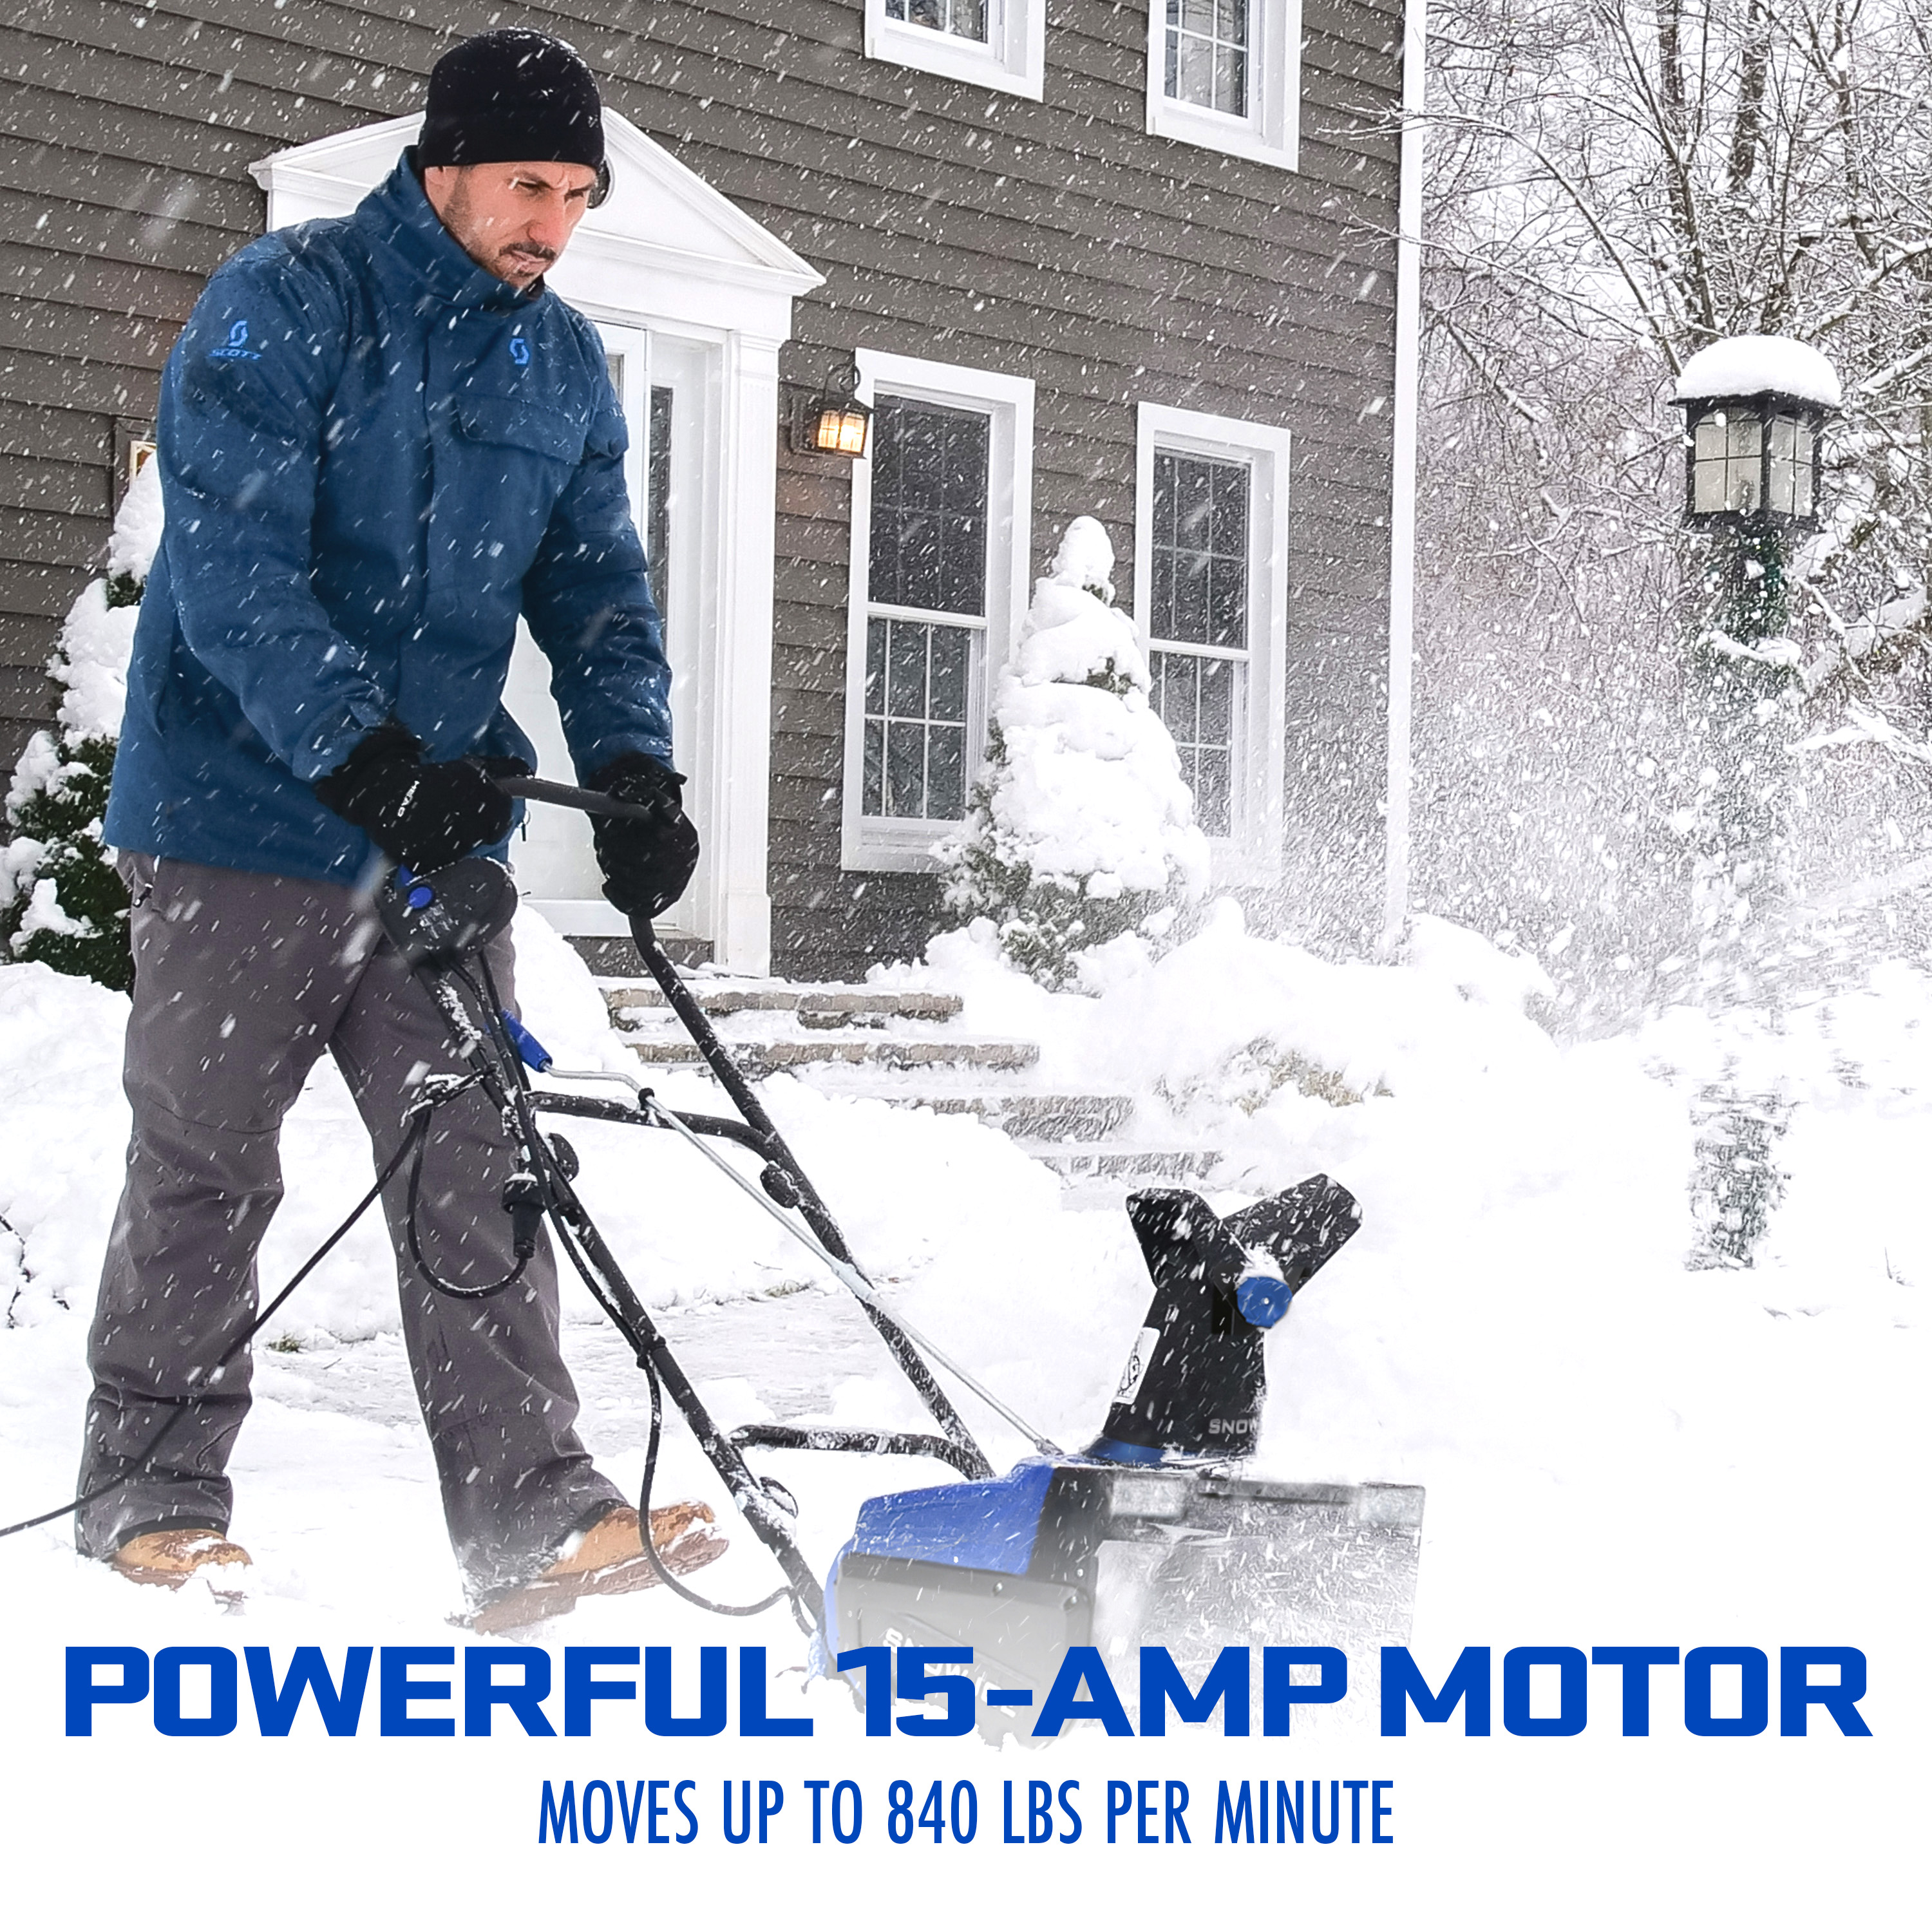 Snow Joe 22-inch Electric Single-Stage Snow Blower W/ Dual LED Lights, 15-Amp - image 4 of 16